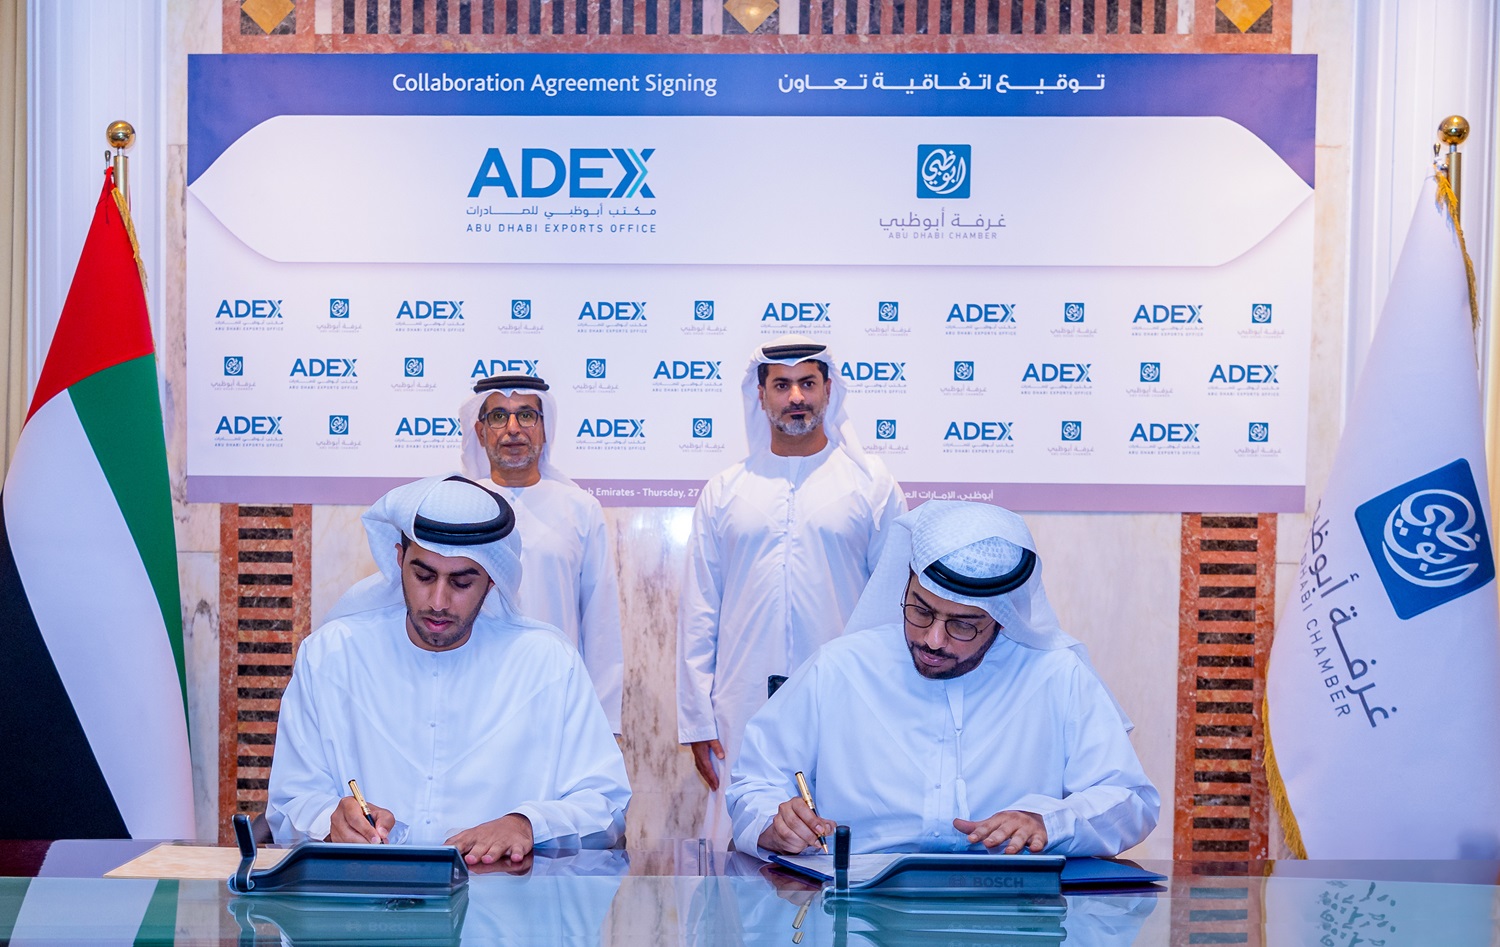 Abu Dhabi Chamber Signs Cooperation Agreement With Abu Dhabi Exports Office